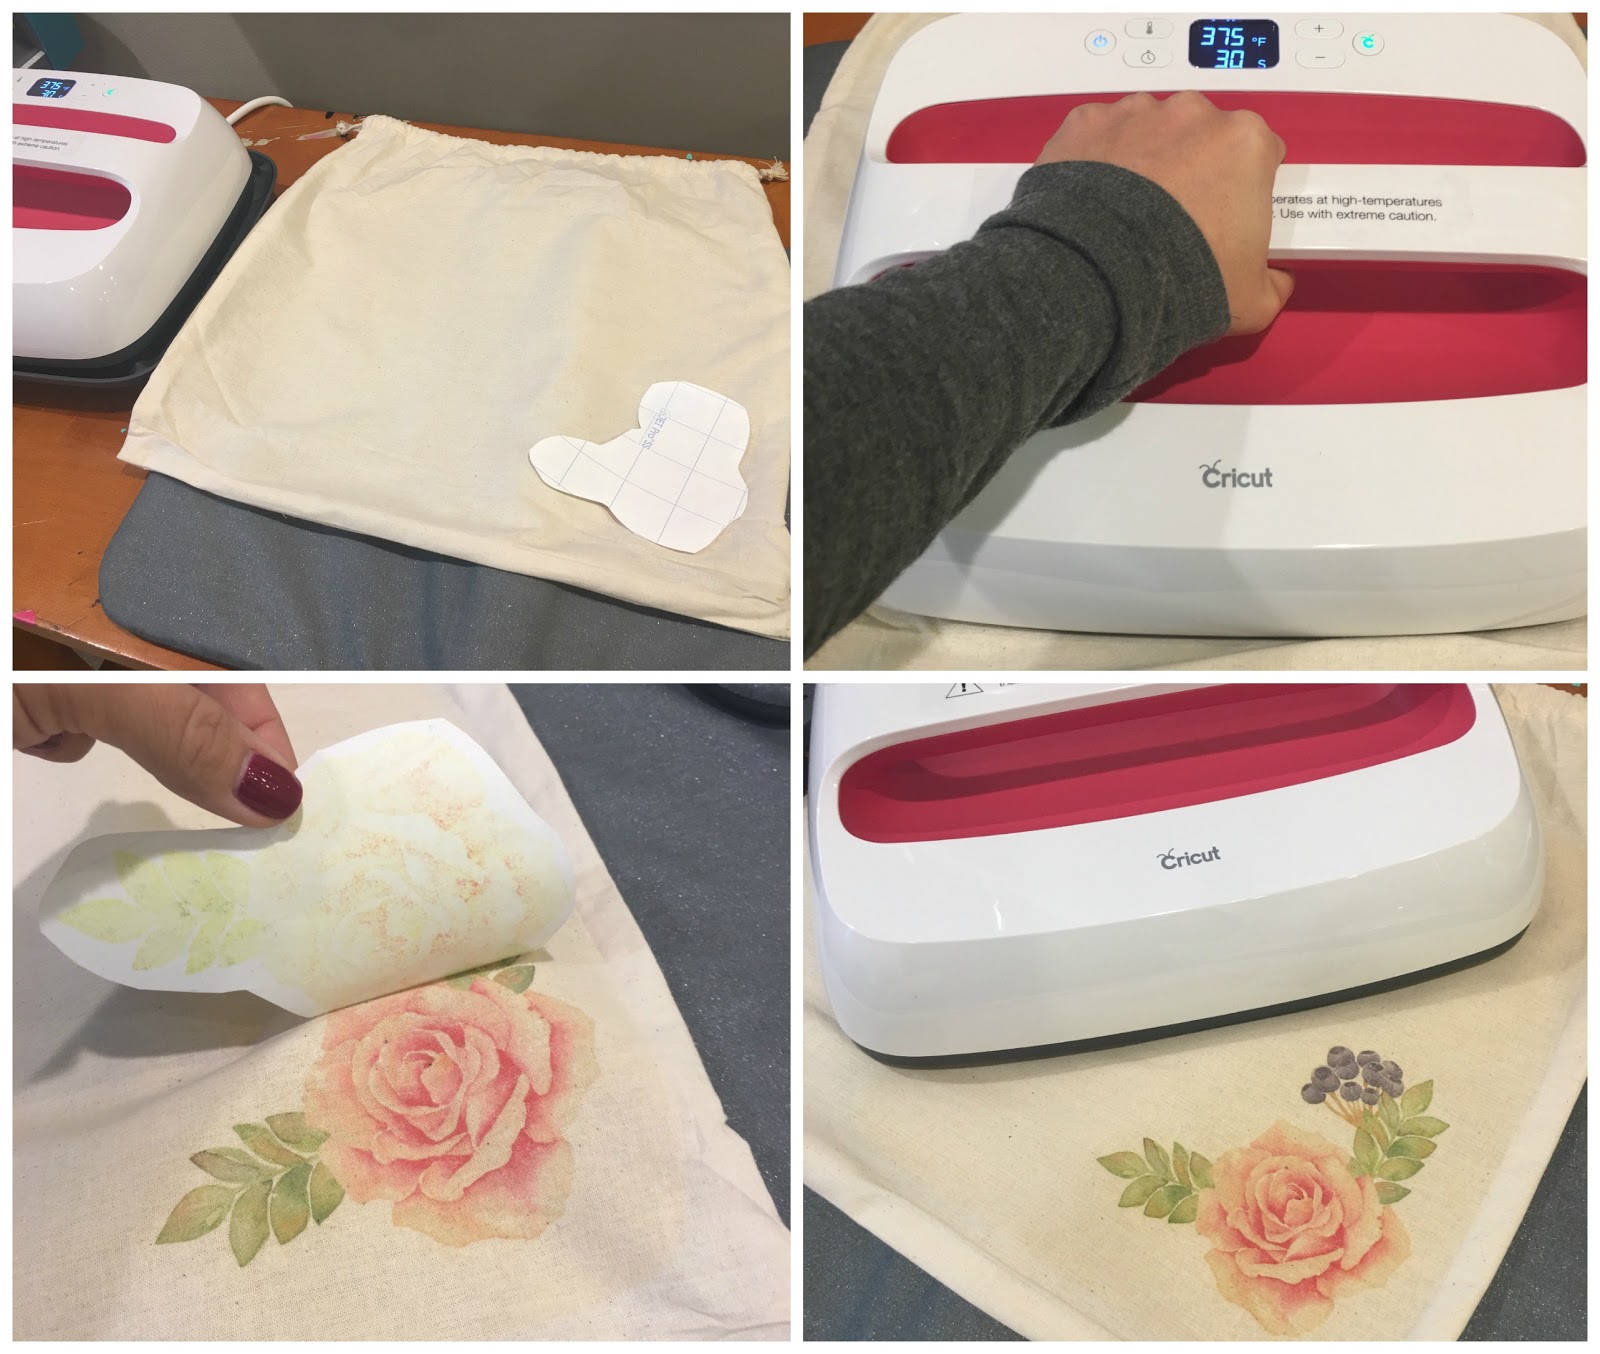 Cricut EasyPress 2 Review: All Your Burning Questions Answered